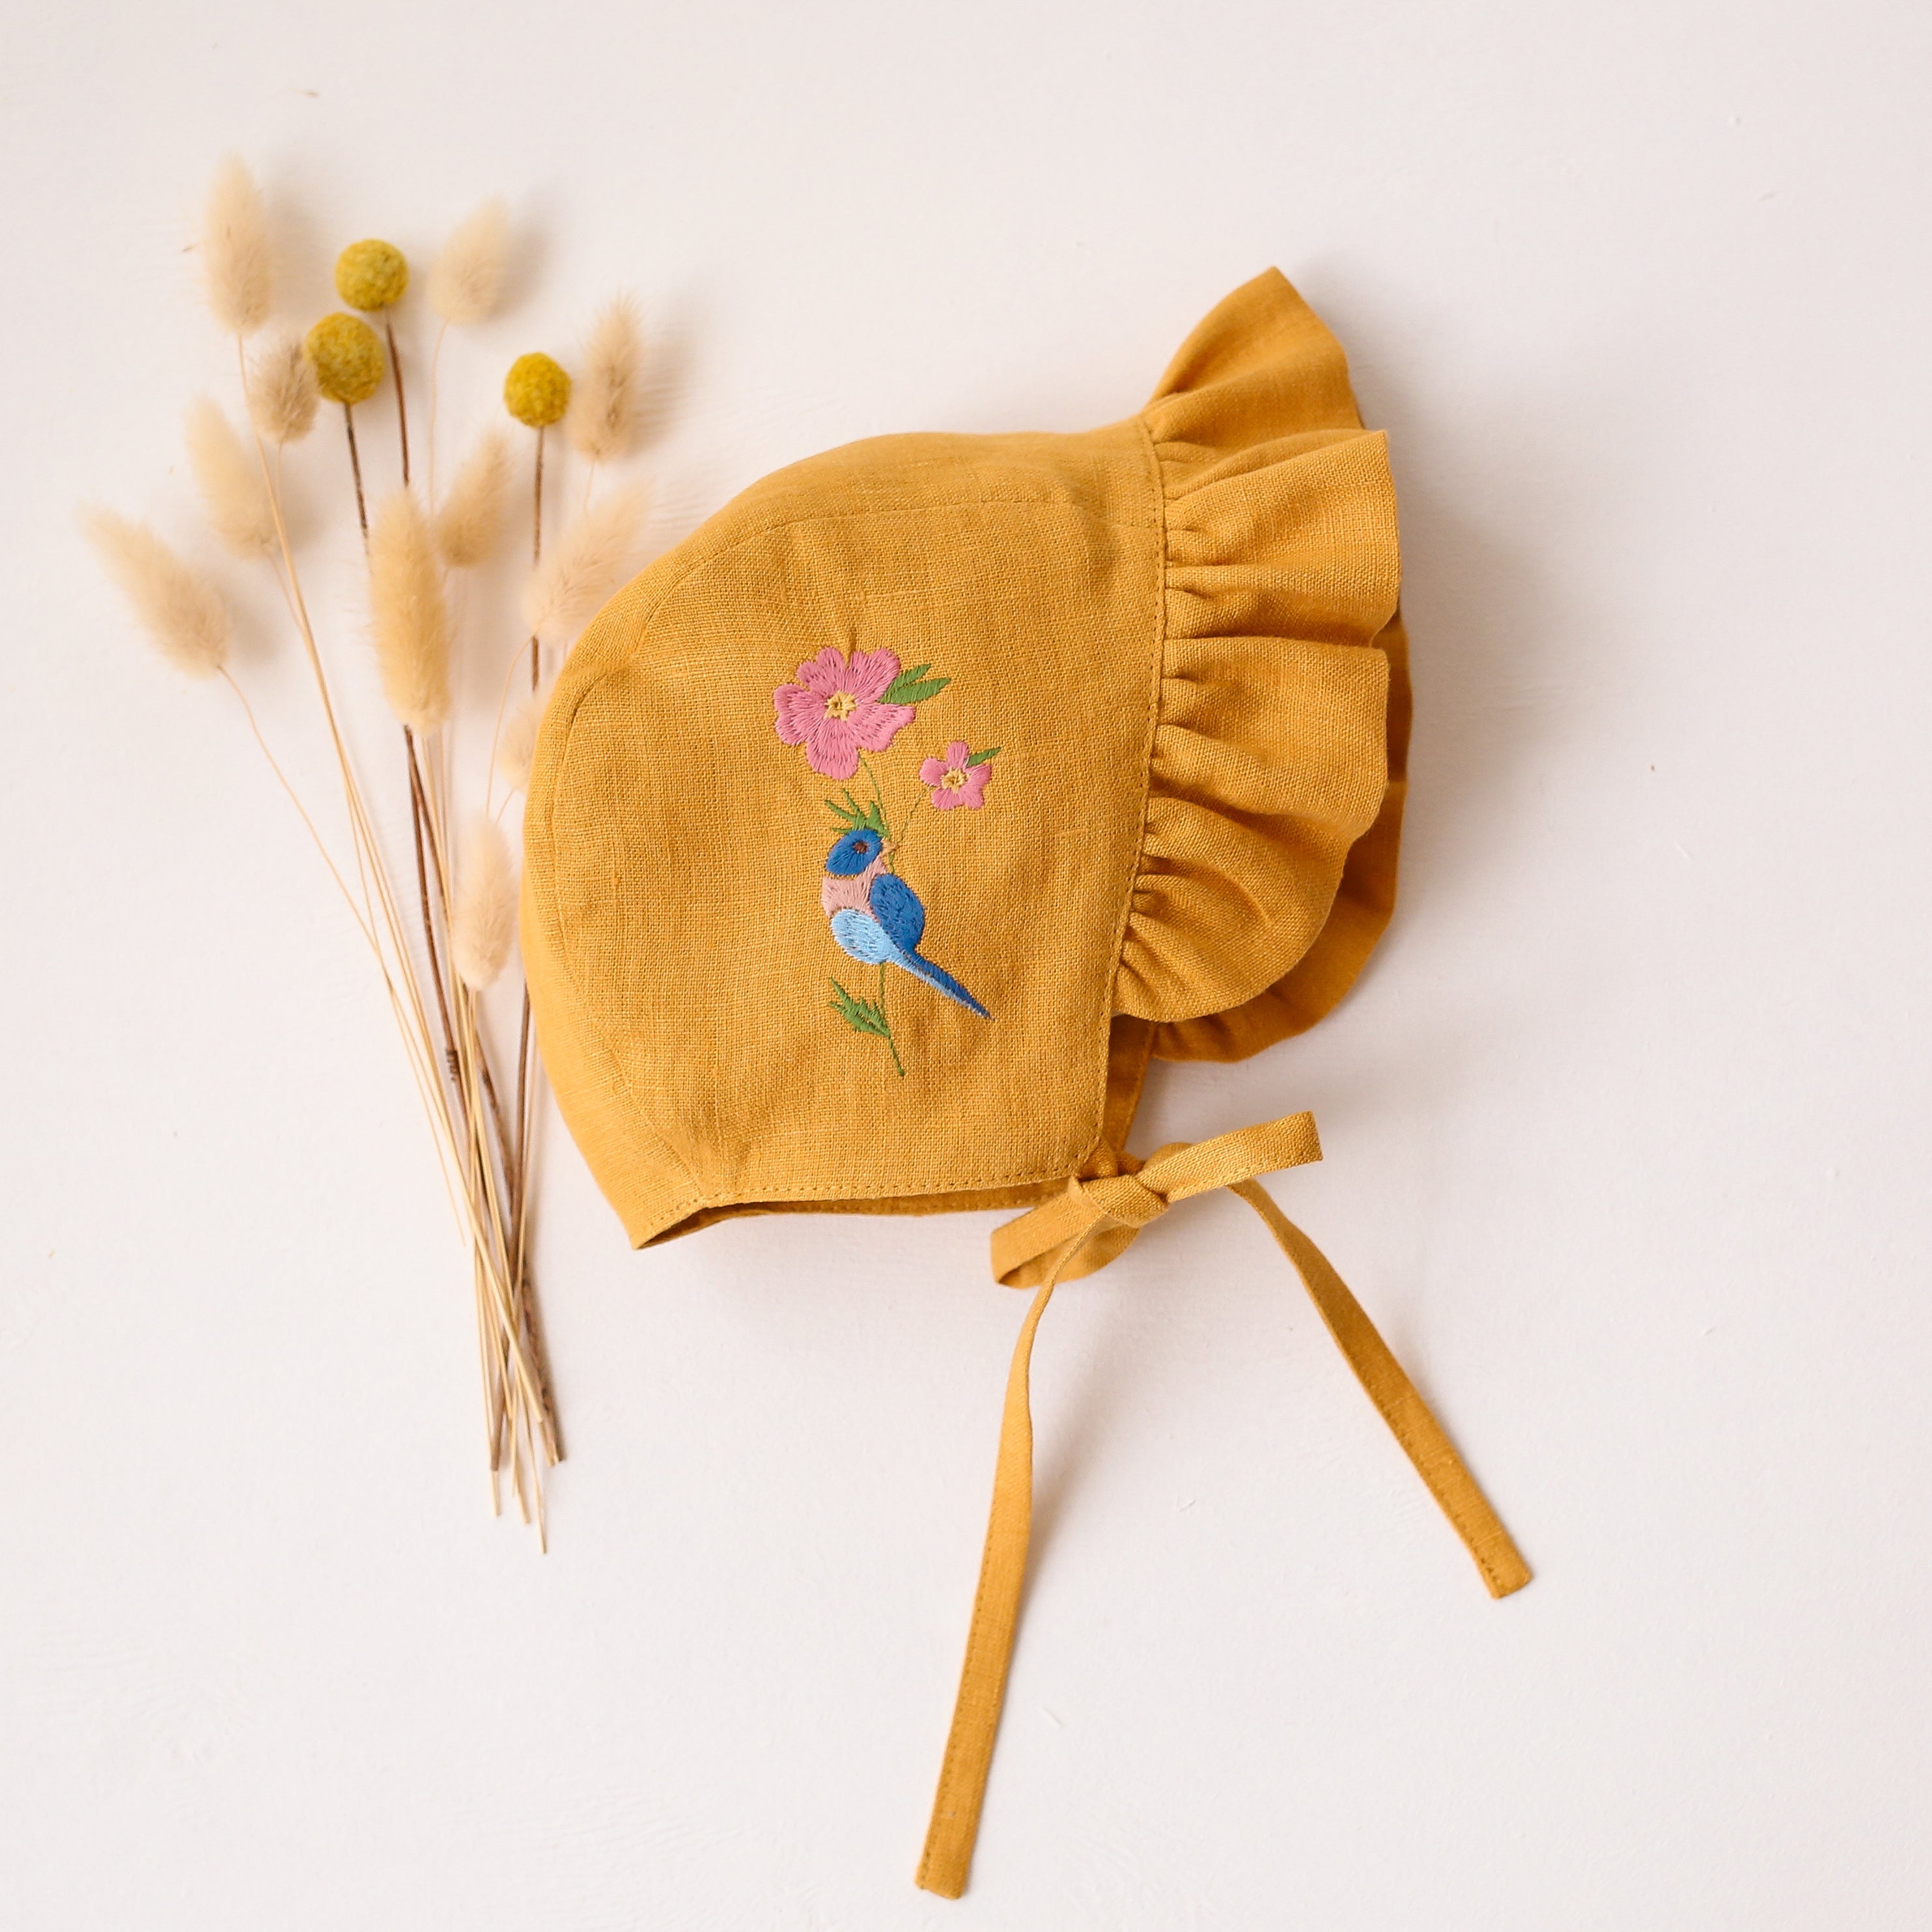 Amber Linen Ruffle Brimmed Bonnet with “Bird on Flower” Embroidery